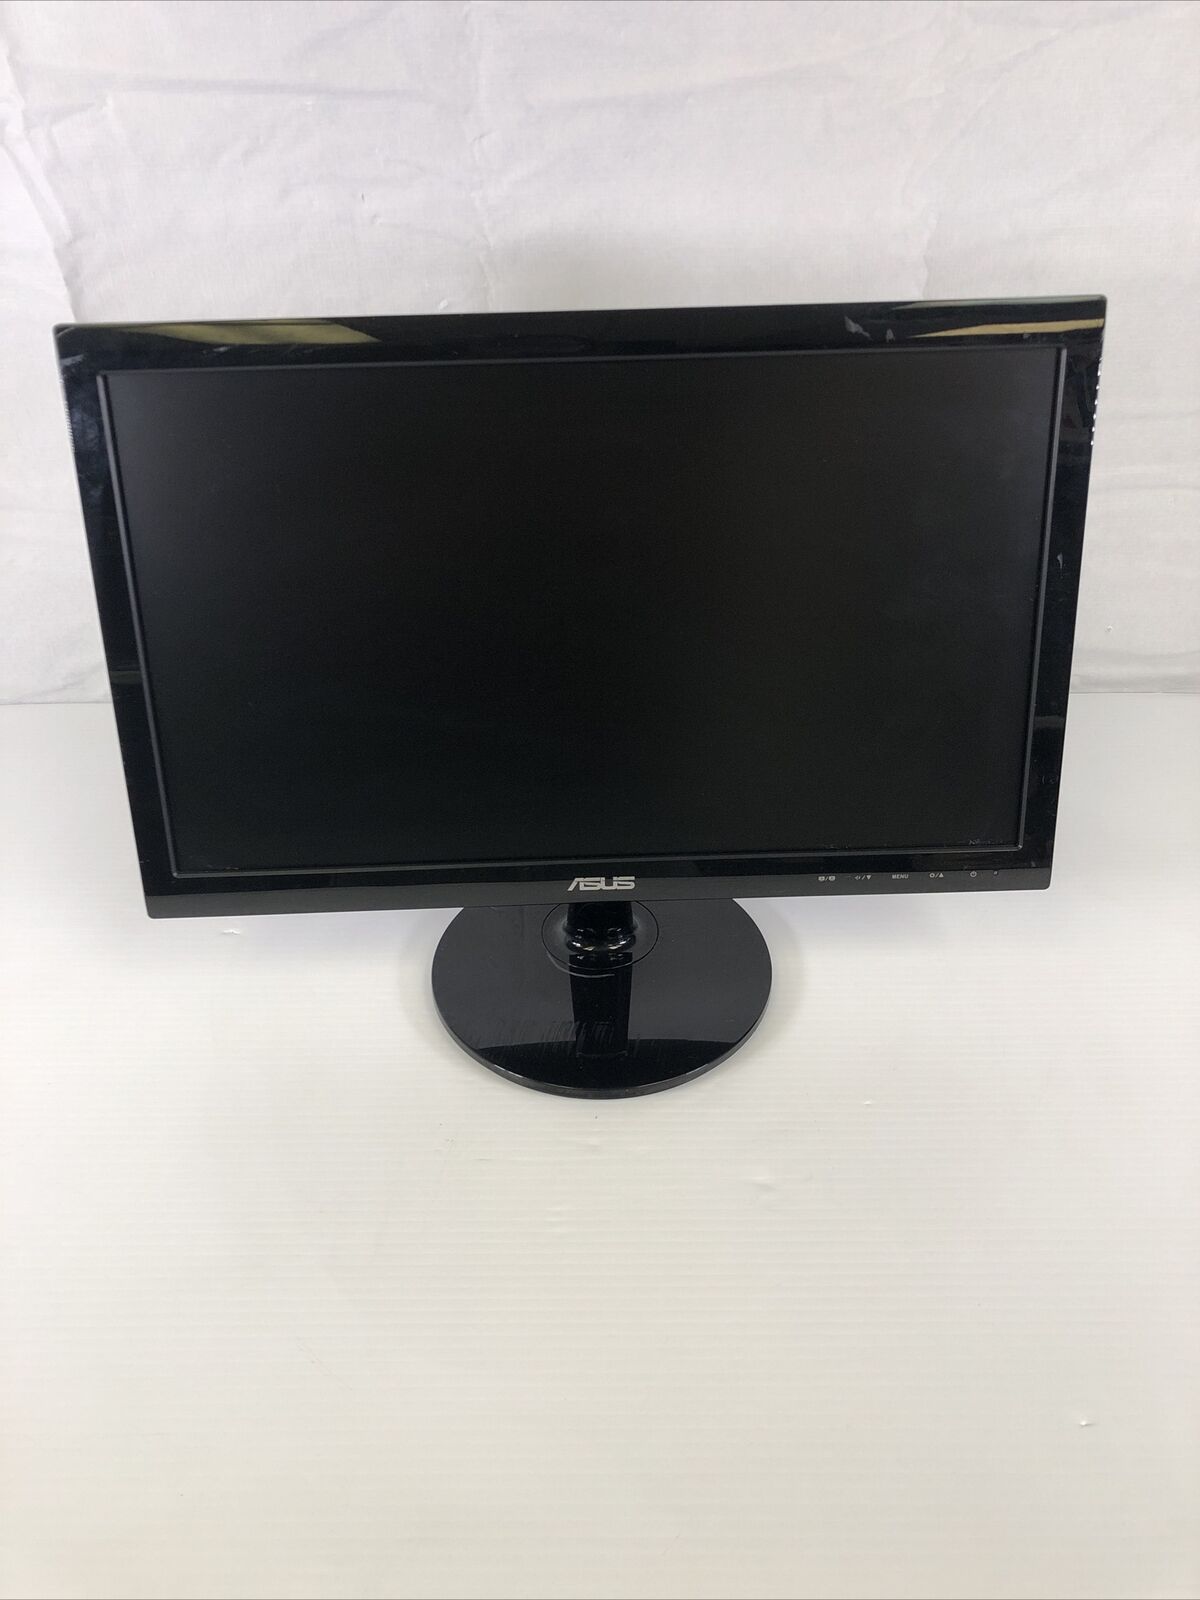 ASUS VS197D LCD Monitor Flat Screen Black Includes Power Cable And VGA Cable 